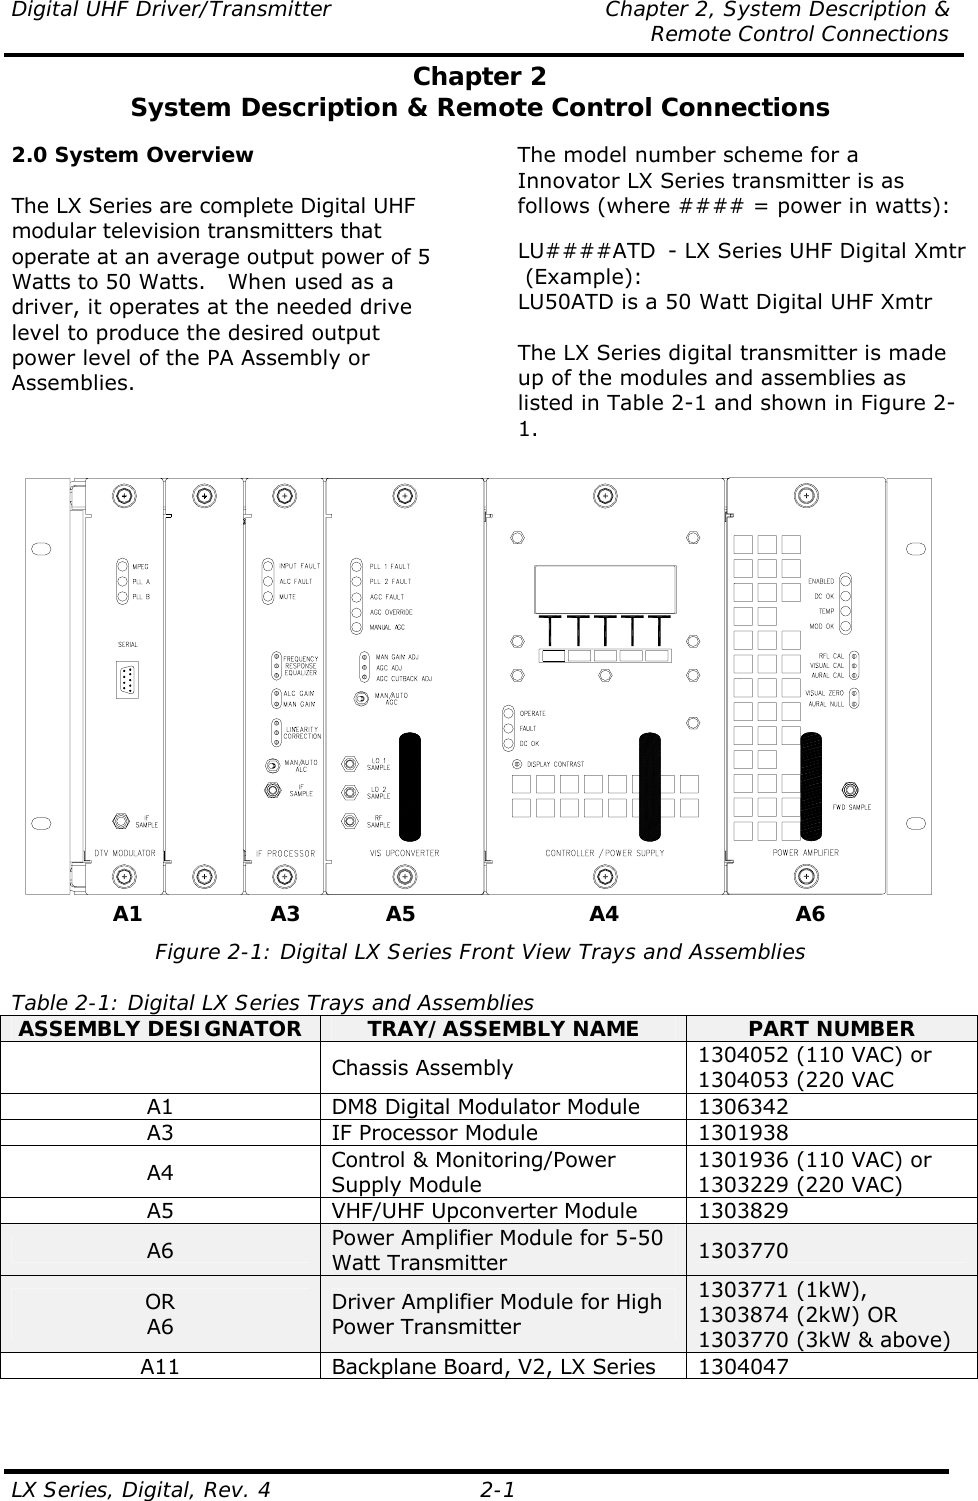 Digital UHF Driver/Transmitter  Chapter 2, System Description &amp;   Remote Control Connections LX Series, Digital, Rev. 4    2-1 Chapter 2 System Description &amp; Remote Control Connections  2.0 System Overview  The LX Series are complete Digital UHF modular television transmitters that operate at an average output power of 5 Watts to 50 Watts.   When used as a driver, it operates at the needed drive level to produce the desired output power level of the PA Assembly or Assemblies.  The model number scheme for a Innovator LX Series transmitter is as follows (where #### = power in watts):   LU####ATD  - LX Series UHF Digital Xmtr  (Example): LU50ATD is a 50 Watt Digital UHF Xmtr  The LX Series digital transmitter is made up of the modules and assemblies as listed in Table 2-1 and shown in Figure 2-1.    Figure 2-1: Digital LX Series Front View Trays and Assemblies  Table 2-1: Digital LX Series Trays and Assemblies ASSEMBLY DESIGNATOR  TRAY/ASSEMBLY NAME  PART NUMBER  Chassis Assembly  1304052 (110 VAC) or 1304053 (220 VAC A1  DM8 Digital Modulator Module  1306342 A3 IF Processor Module 1301938 A4  Control &amp; Monitoring/Power Supply Module 1301936 (110 VAC) or 1303229 (220 VAC) A5 VHF/UHF Upconverter Module 1303829 A6  Power Amplifier Module for 5-50 Watt Transmitter  1303770 OR A6 Driver Amplifier Module for High Power Transmitter 1303771 (1kW), 1303874 (2kW) OR 1303770 (3kW &amp; above) A11  Backplane Board, V2, LX Series  1304047  A1 A3 A5 A4 A6